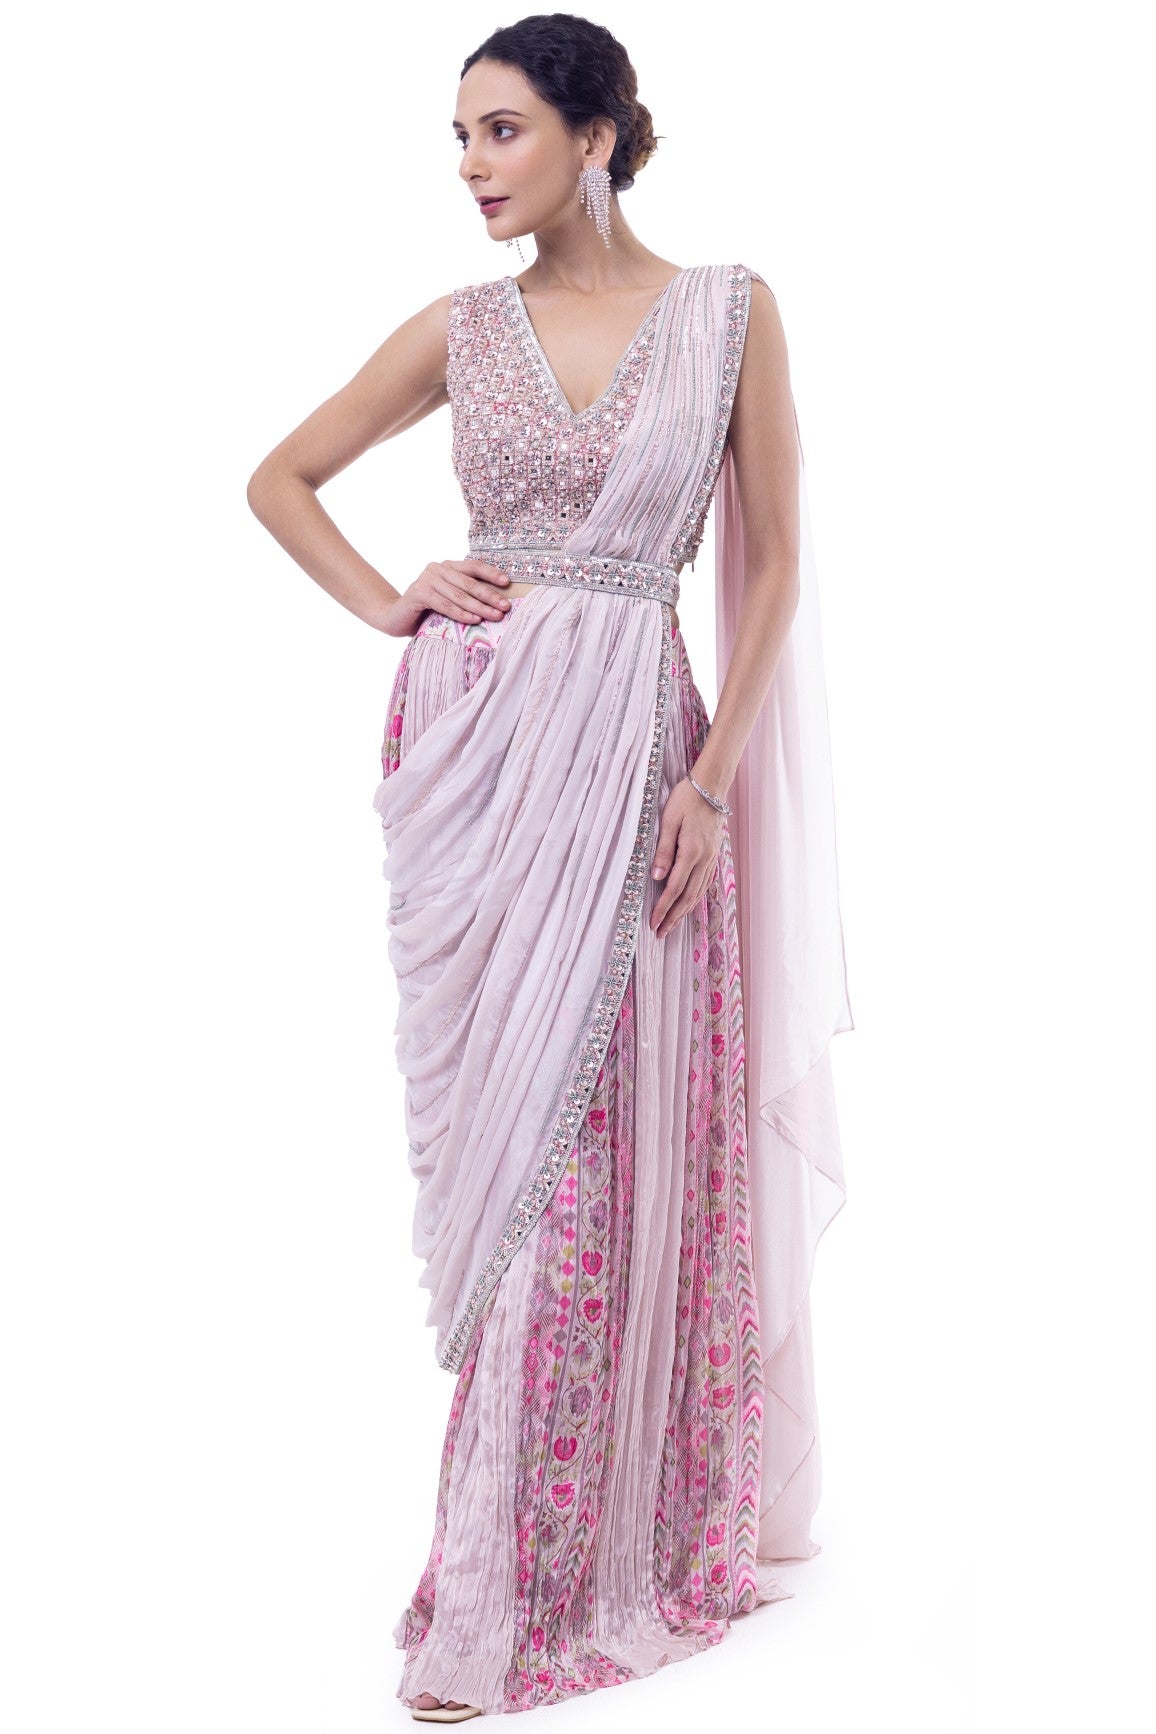 Shop light pink pre-draped chiffon saree online in USA with embellished blouse. Look your best at parties and weddings in beautiful designer sarees, embroidered sarees, handwoven sarees, silk sarees, organza saris from Pure Elegance Indian saree store in USA.-full view